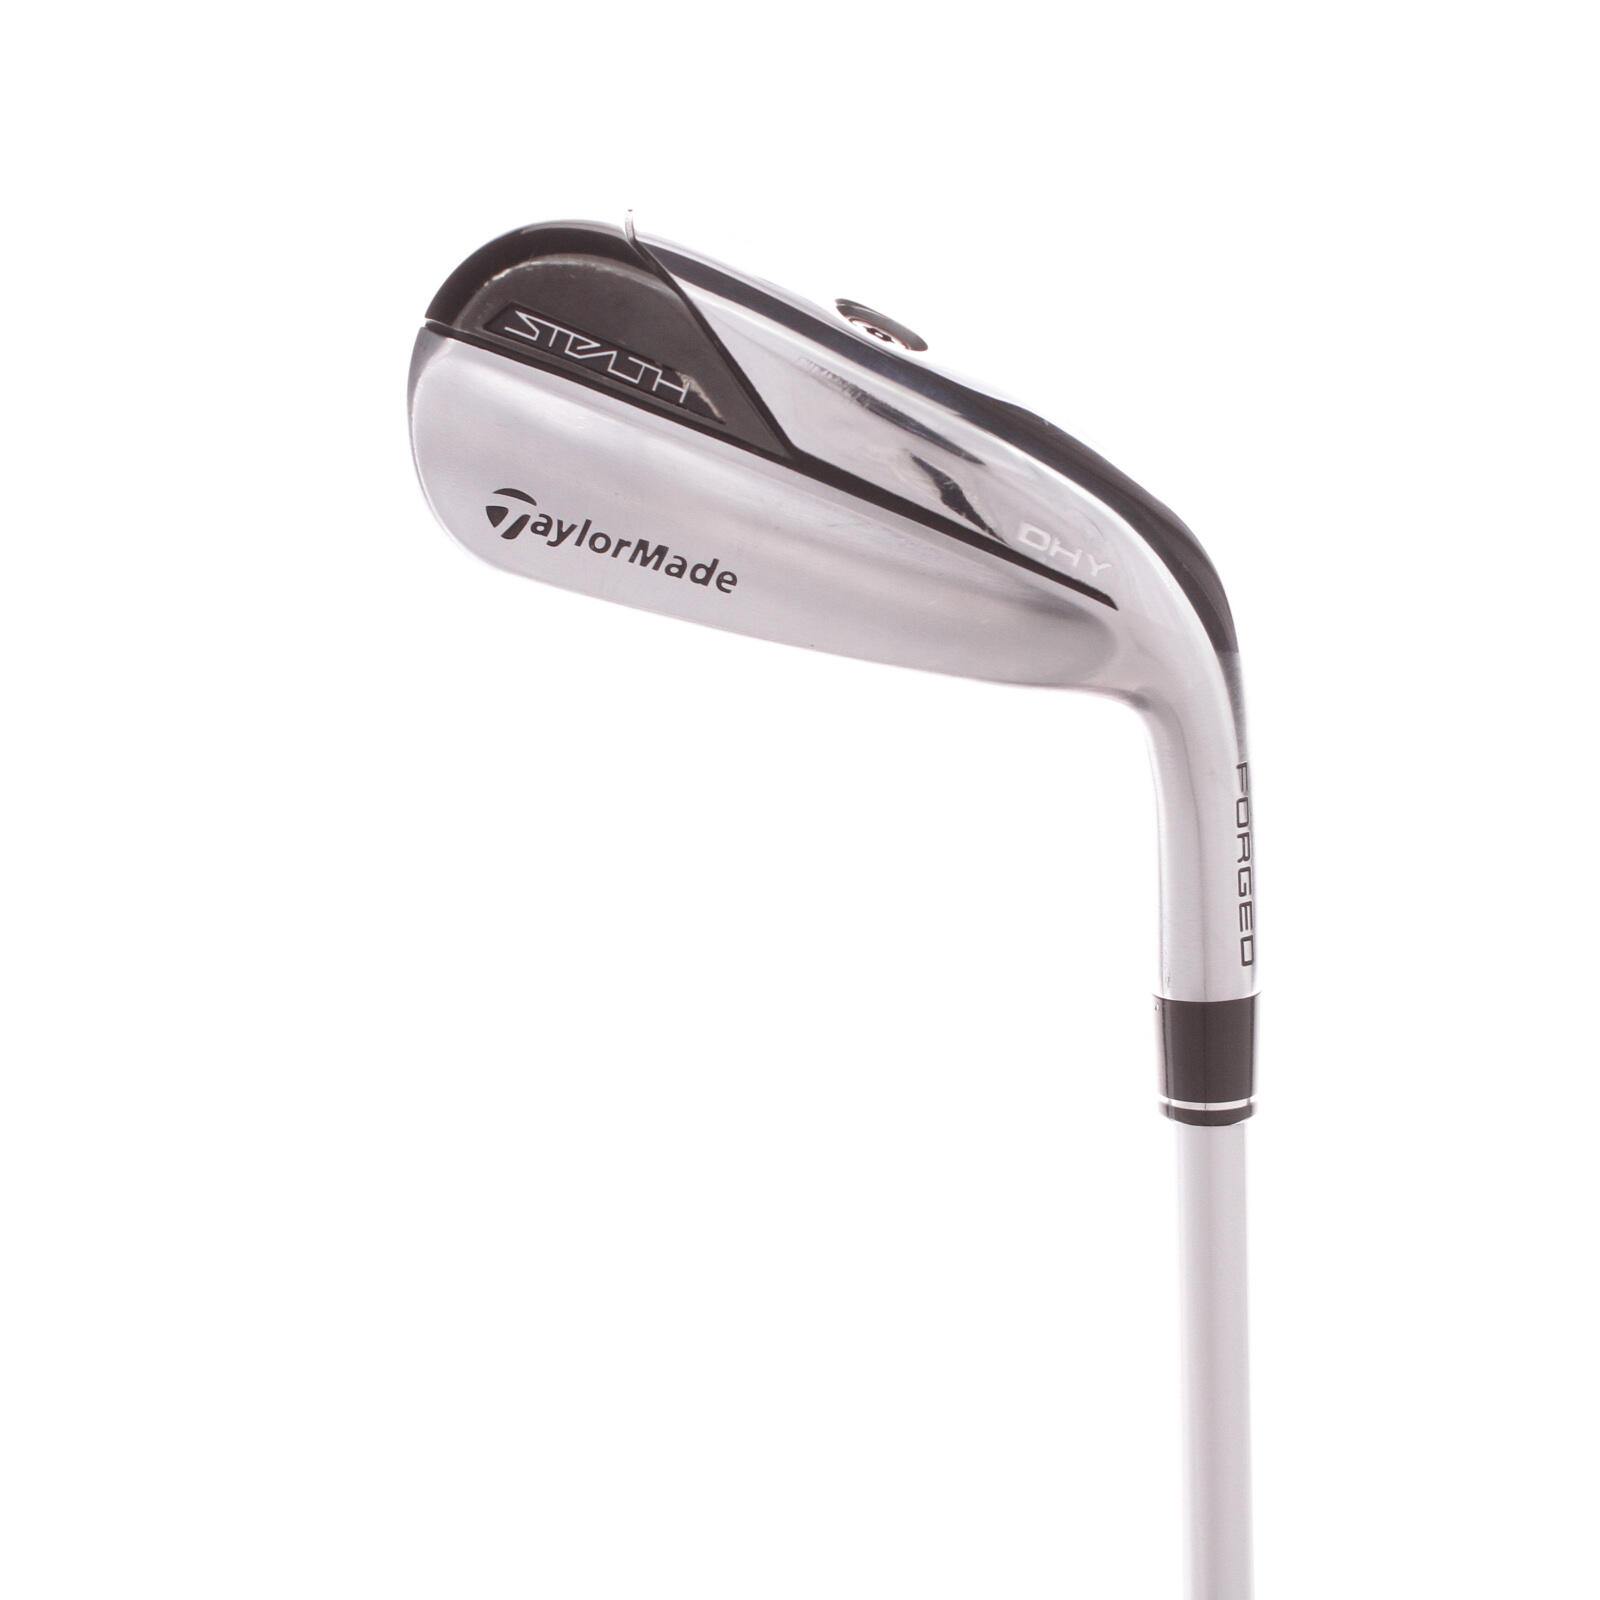 TAYLORMADE USED - Hybrid Iron TaylorMade DHY Graphite Regular Shaft Right Handed - GRADE B